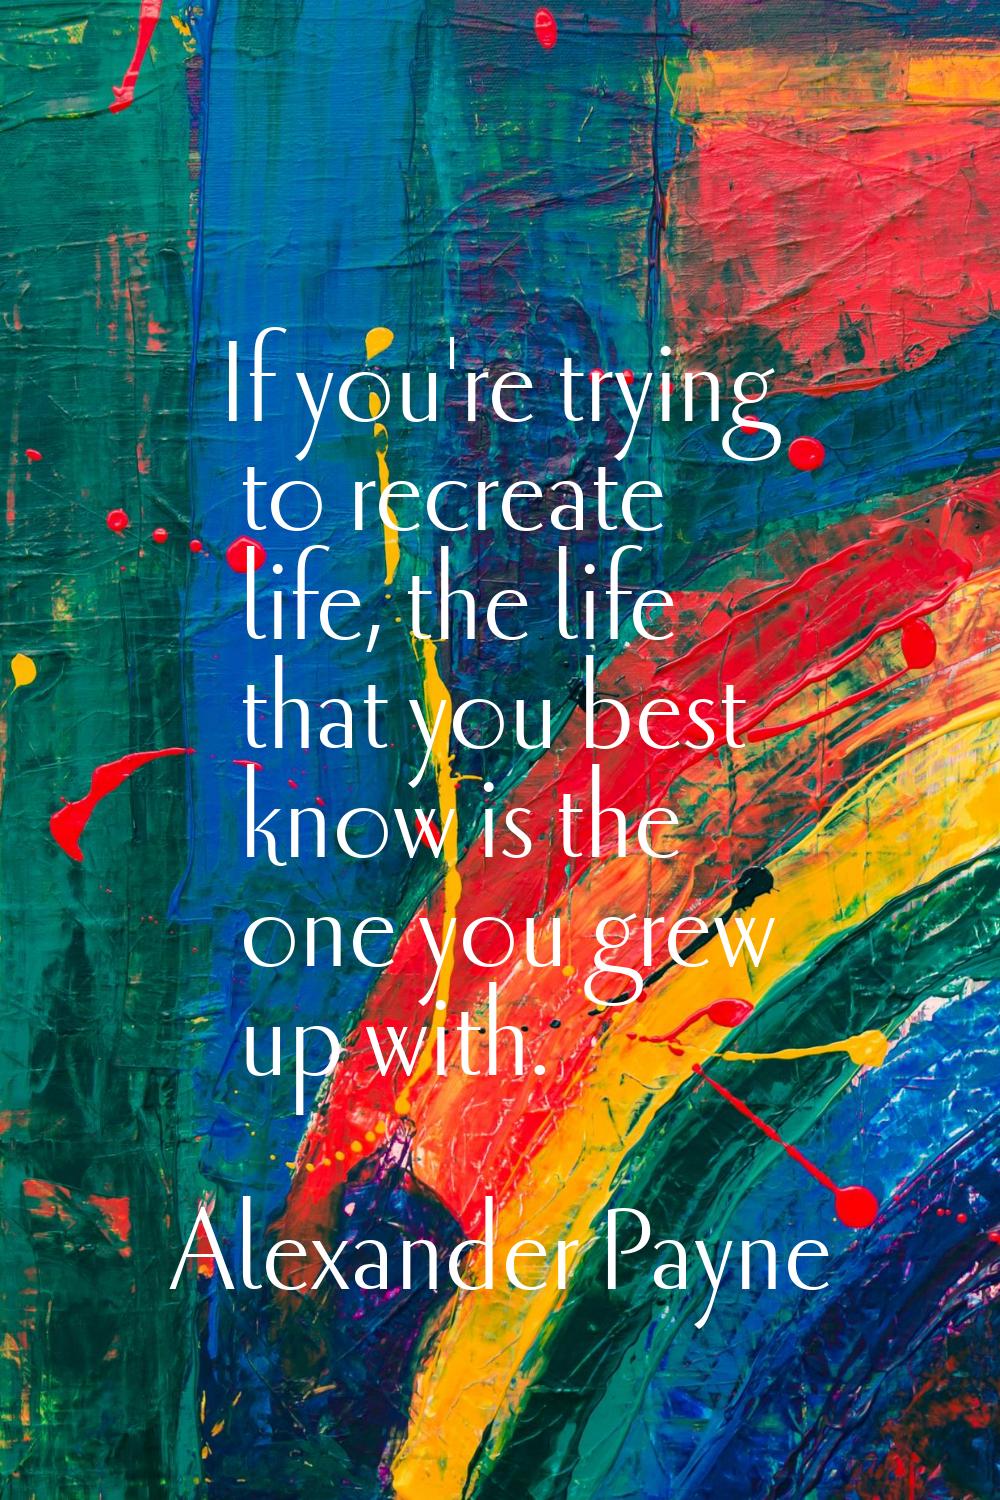 If you're trying to recreate life, the life that you best know is the one you grew up with.